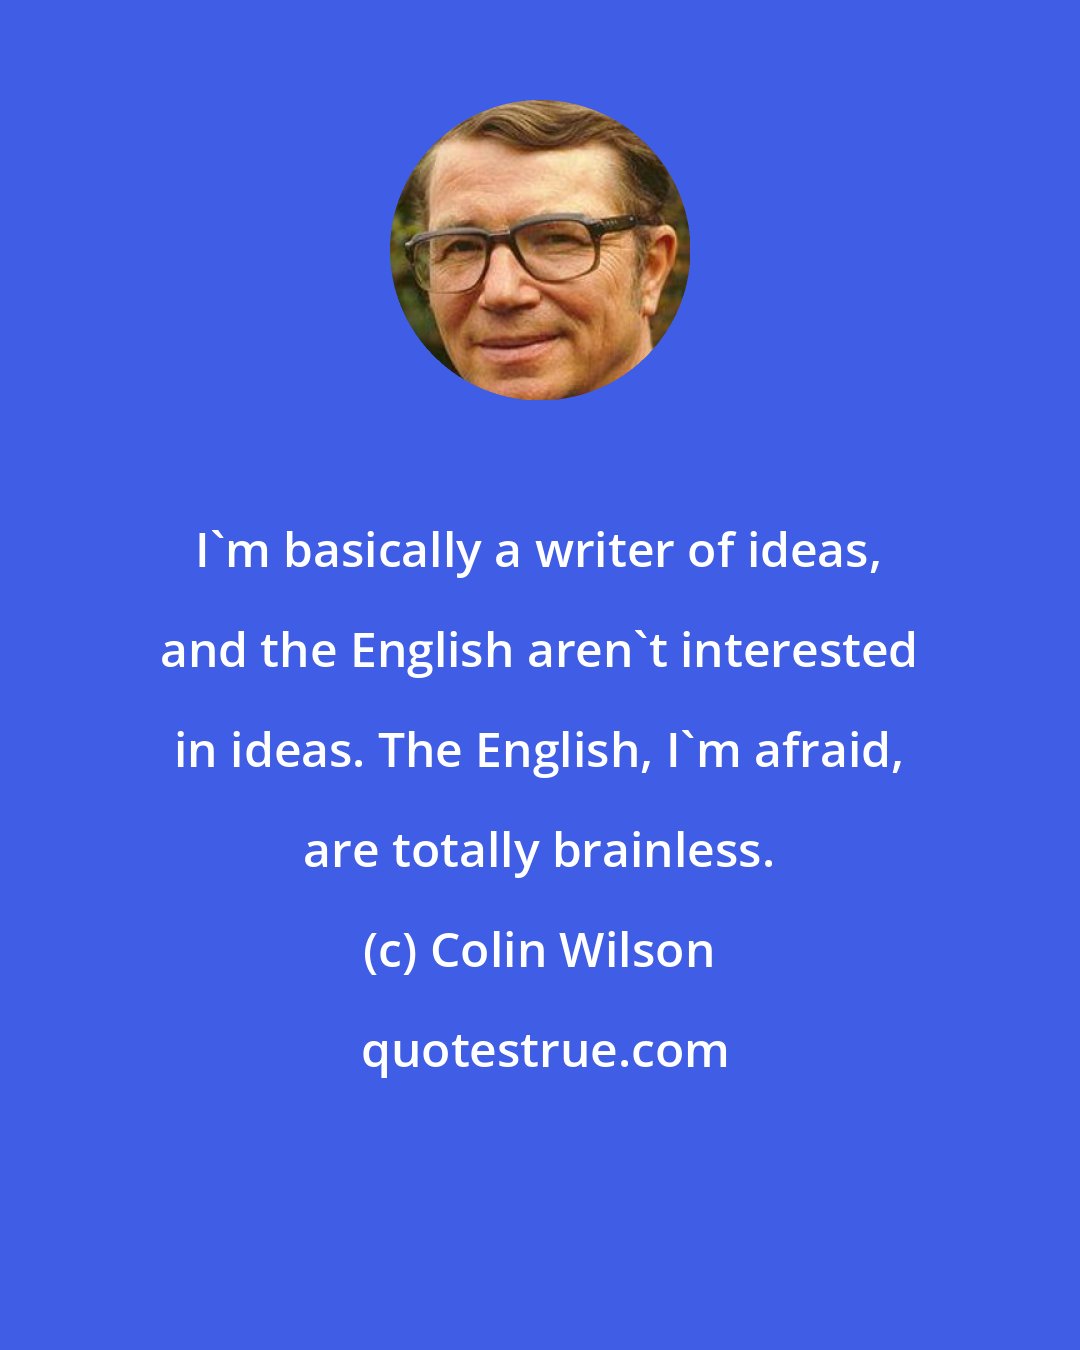 Colin Wilson: I'm basically a writer of ideas, and the English aren't interested in ideas. The English, I'm afraid, are totally brainless.